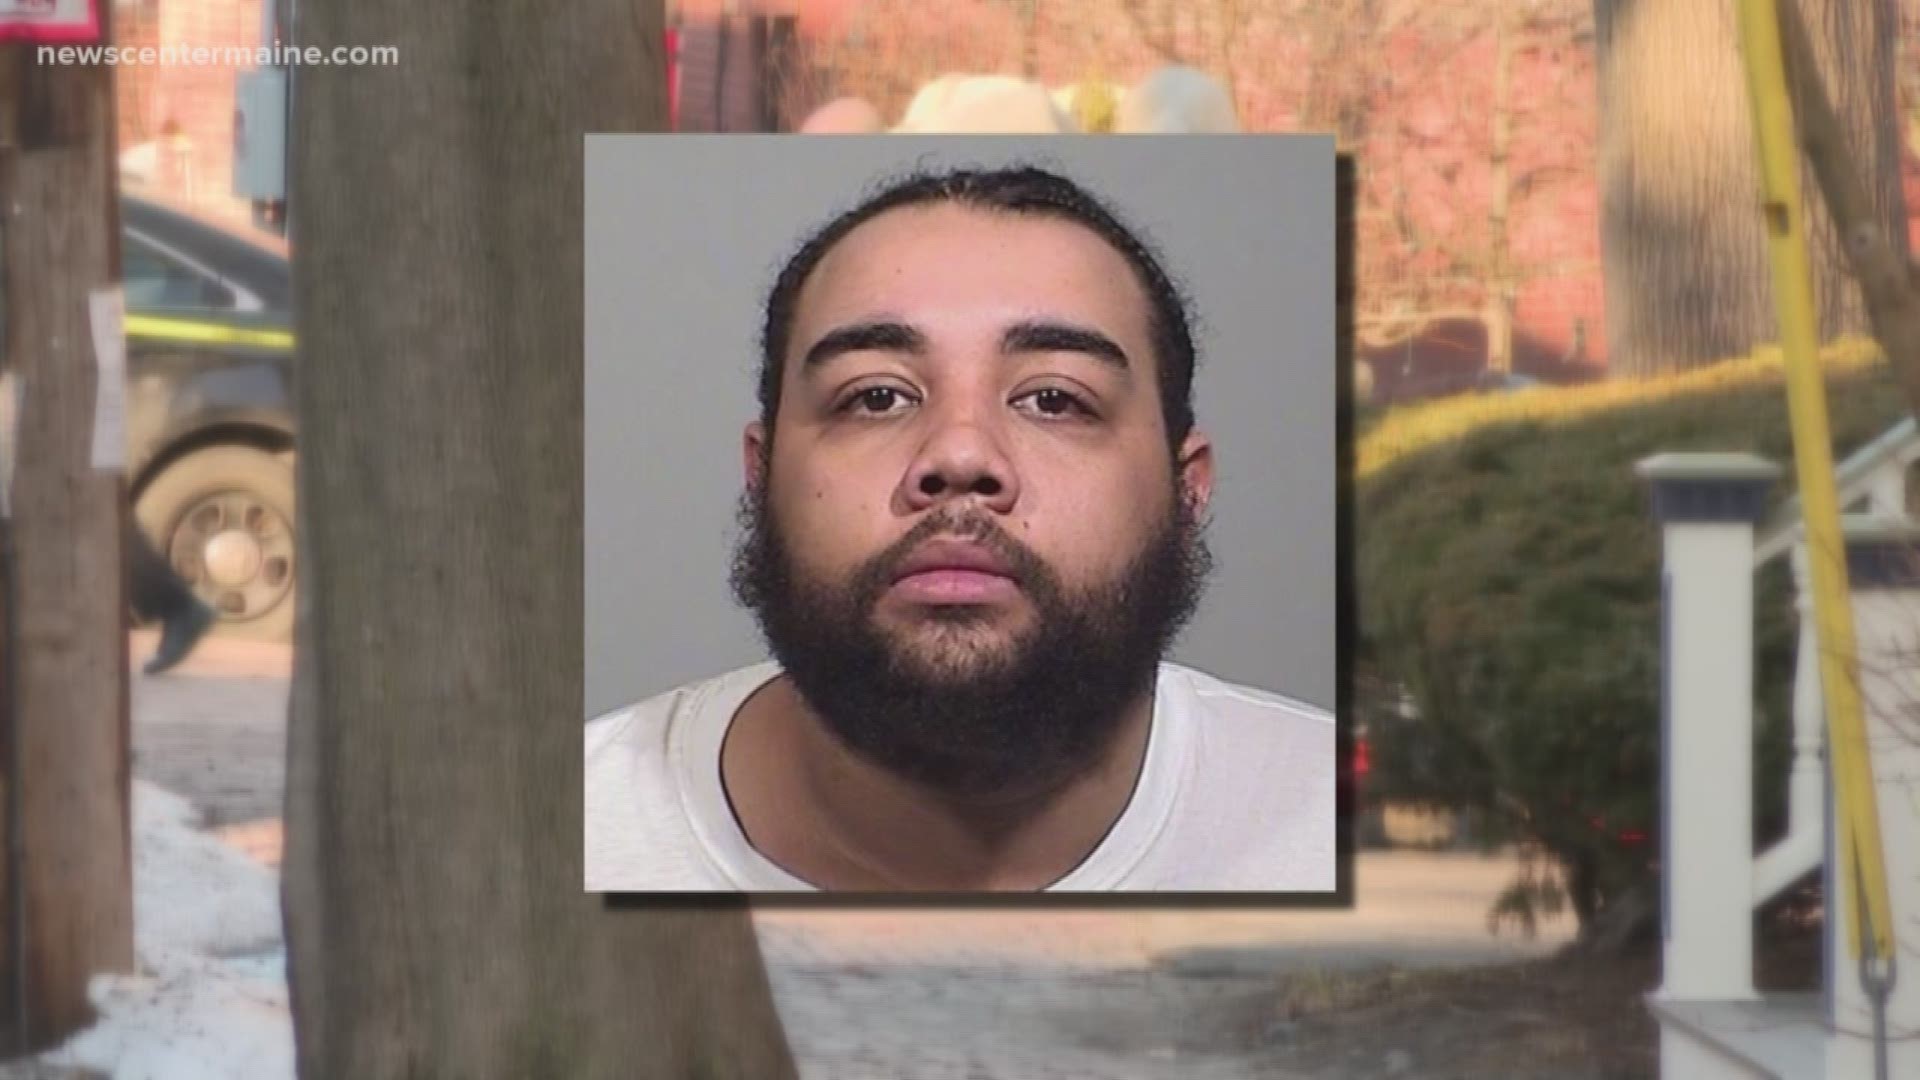 Markus Scott was arrested and charged with reckless conduct with a firearm. Portland Police say the Lewiston Police Department and the FBI Safe Streets Taskforce assisted with the arrest.